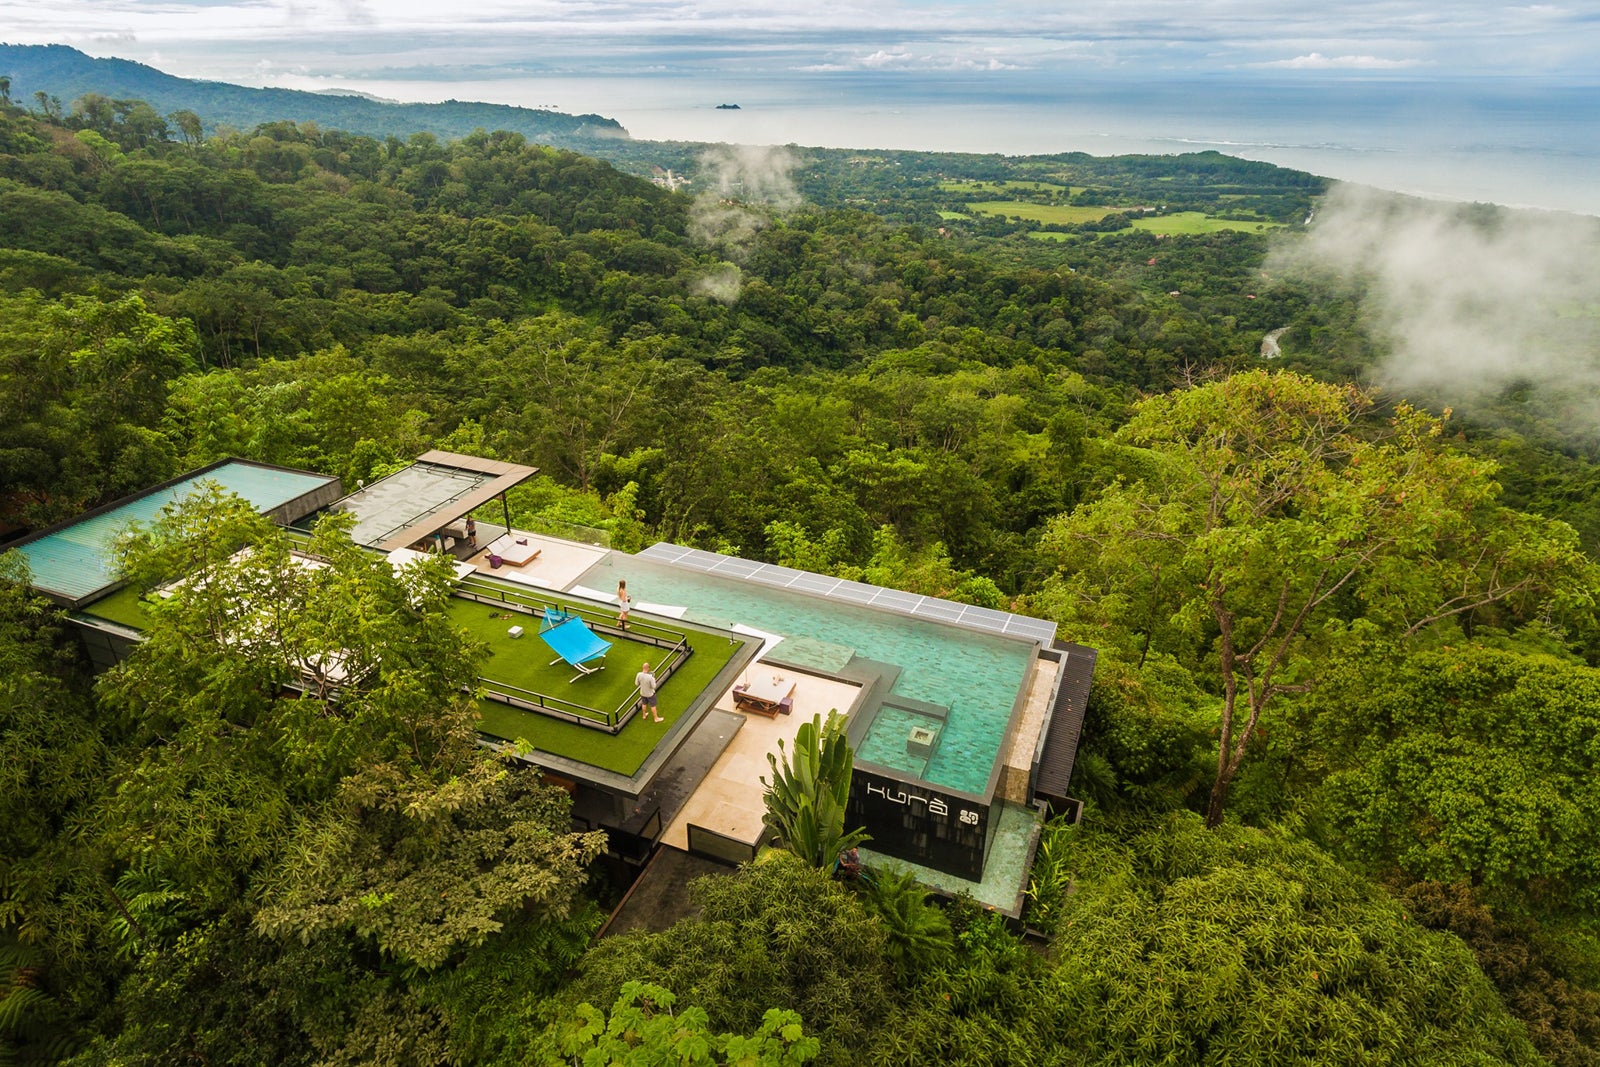 Best all-inclusive resorts in Costa Rica for beach visits or hiking trips